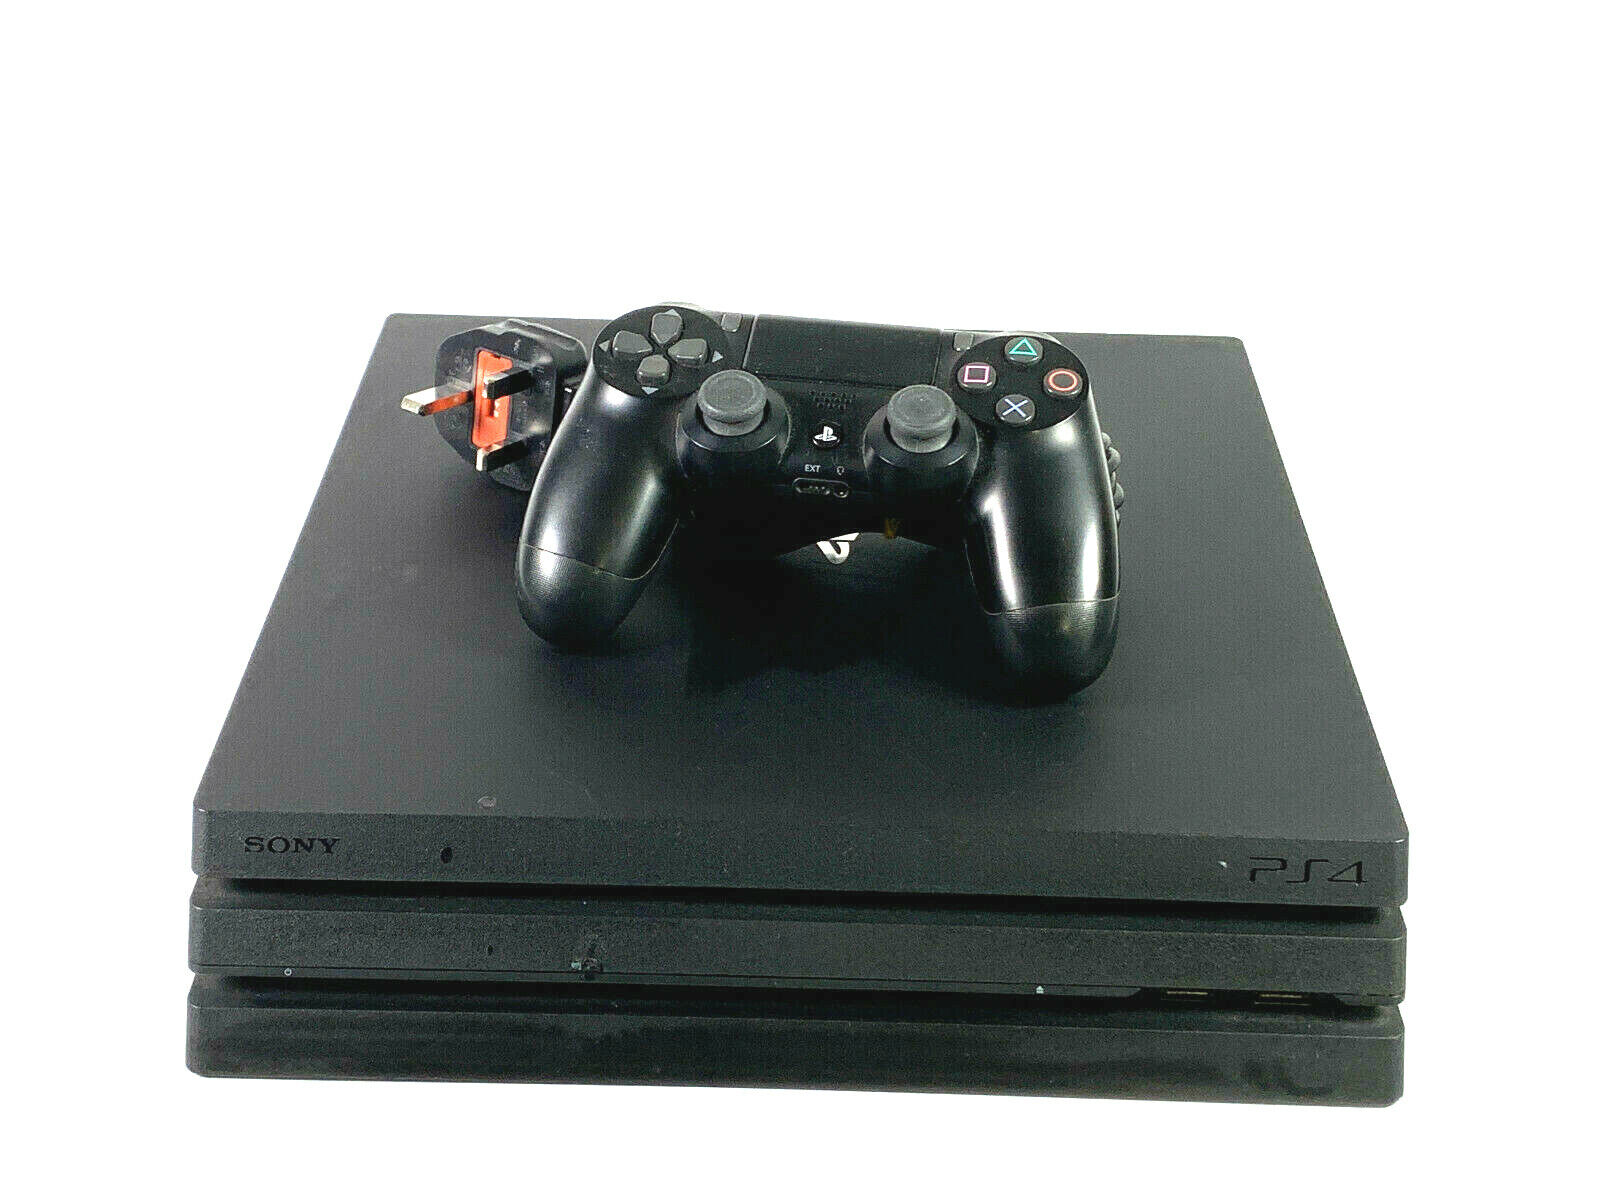 Sony Playstation 4 Pro 1TB Game Console - Black (CUH-7016B) for sale online  | eBay